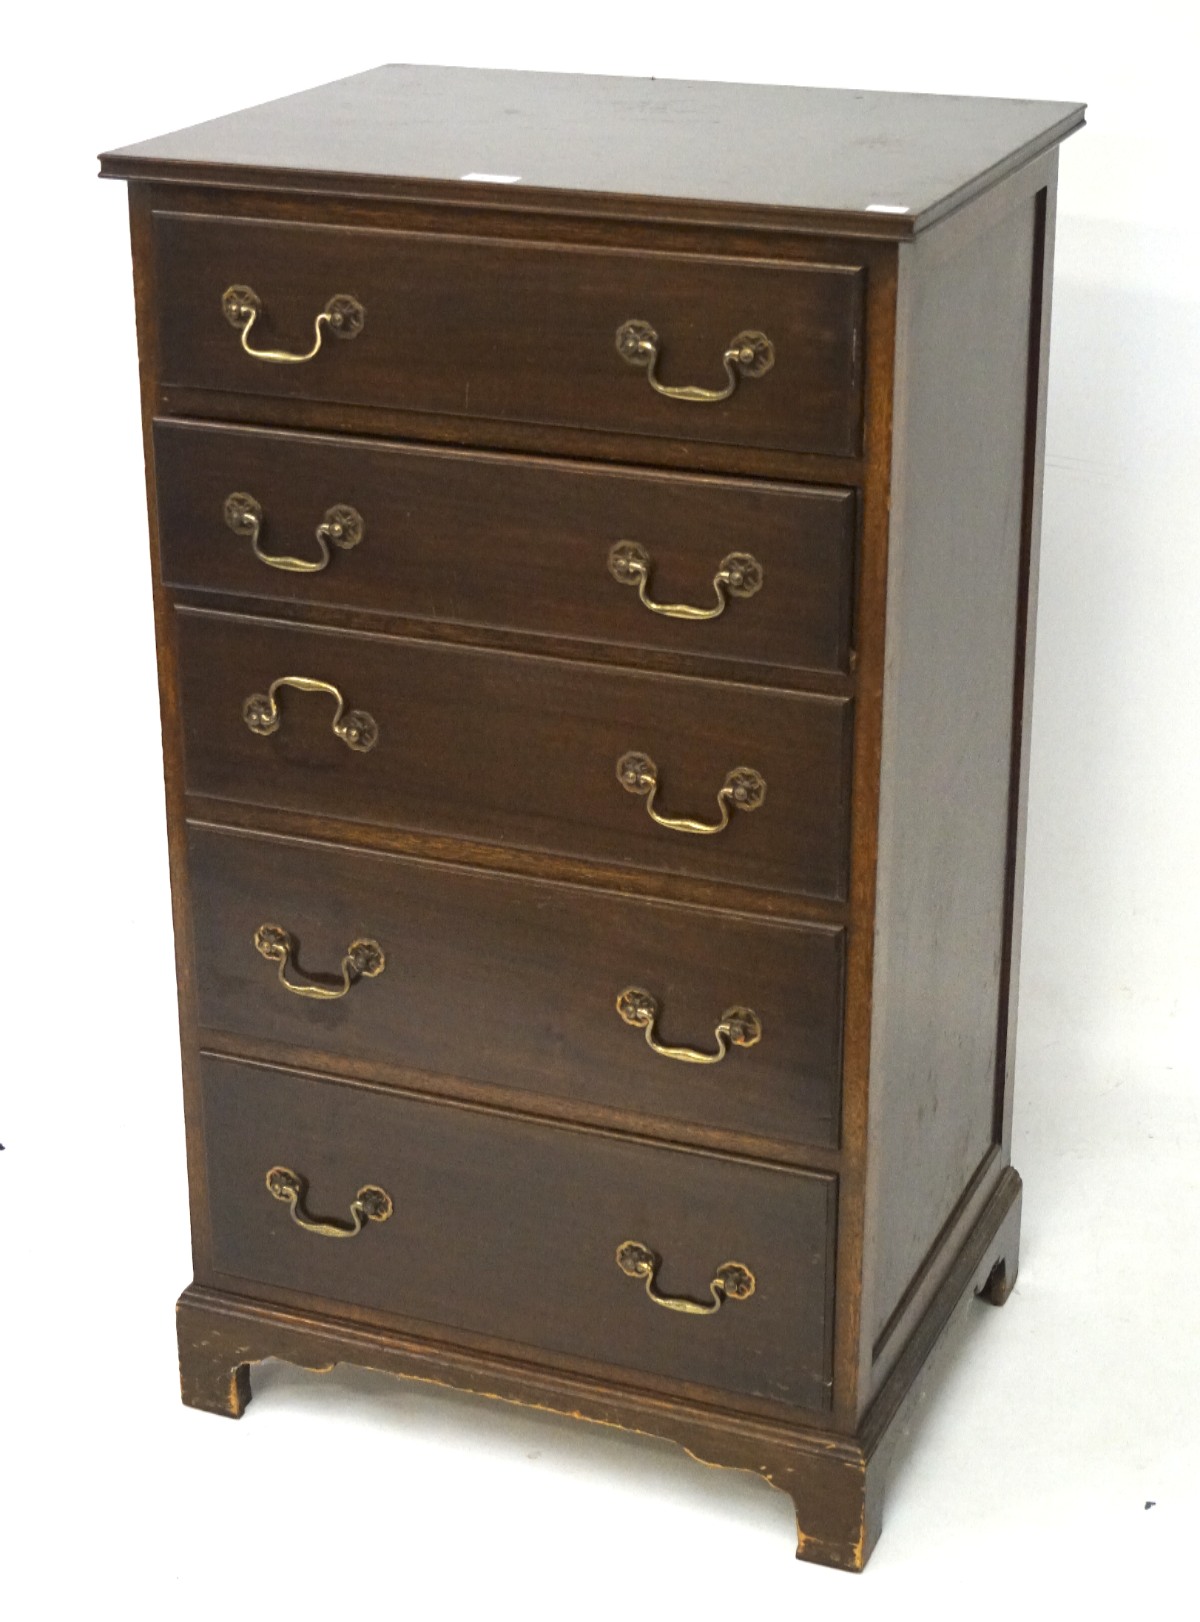 A 20th century mahogany chest of drawers by Waring & Gillow ltd, with label to top draw,